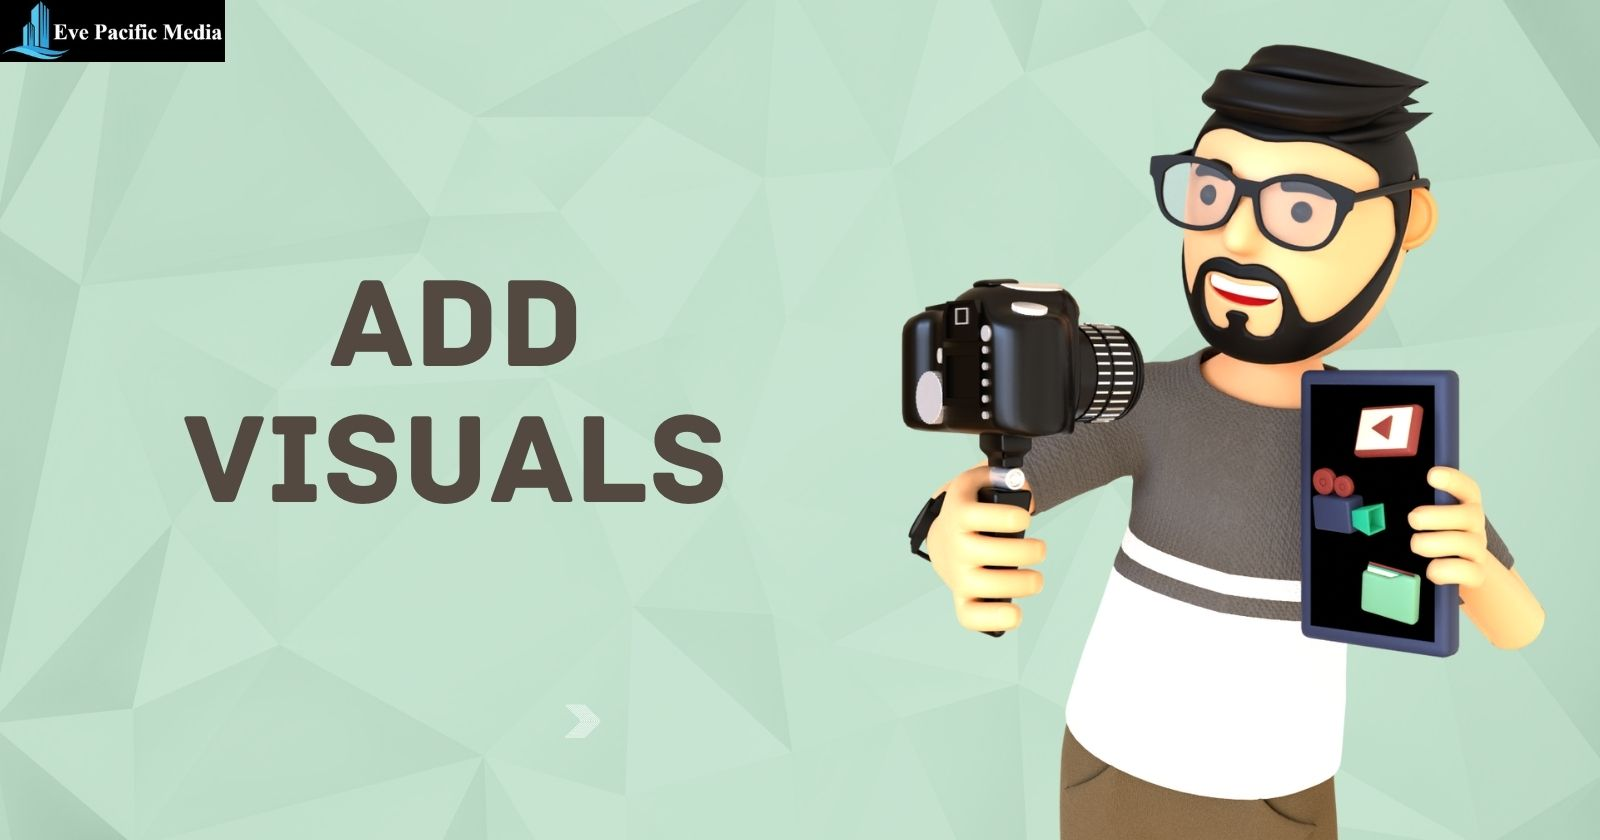 Add visuals, man with camera: Affiliate Marketing Content